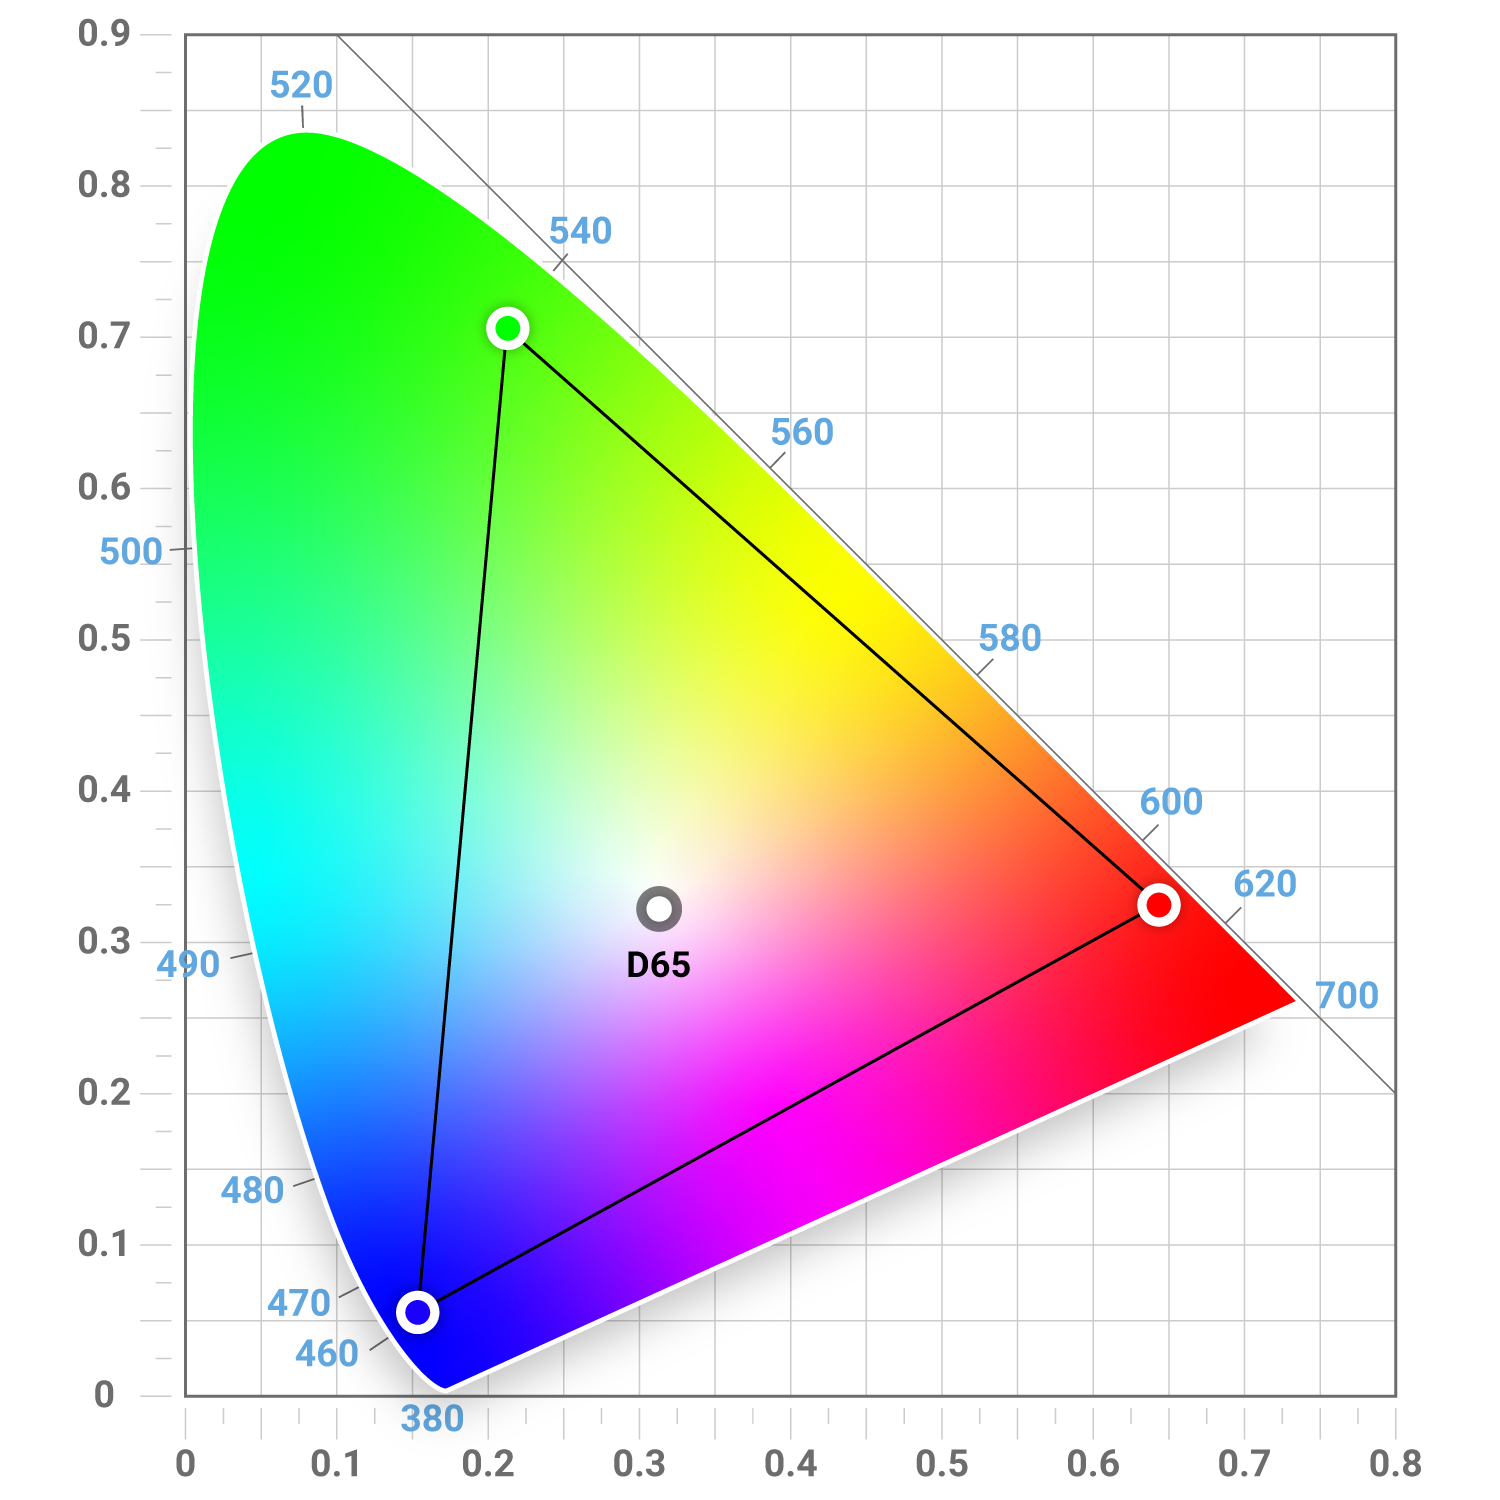 The image shows a diagram which visualizes RGB values used for color calibration. 